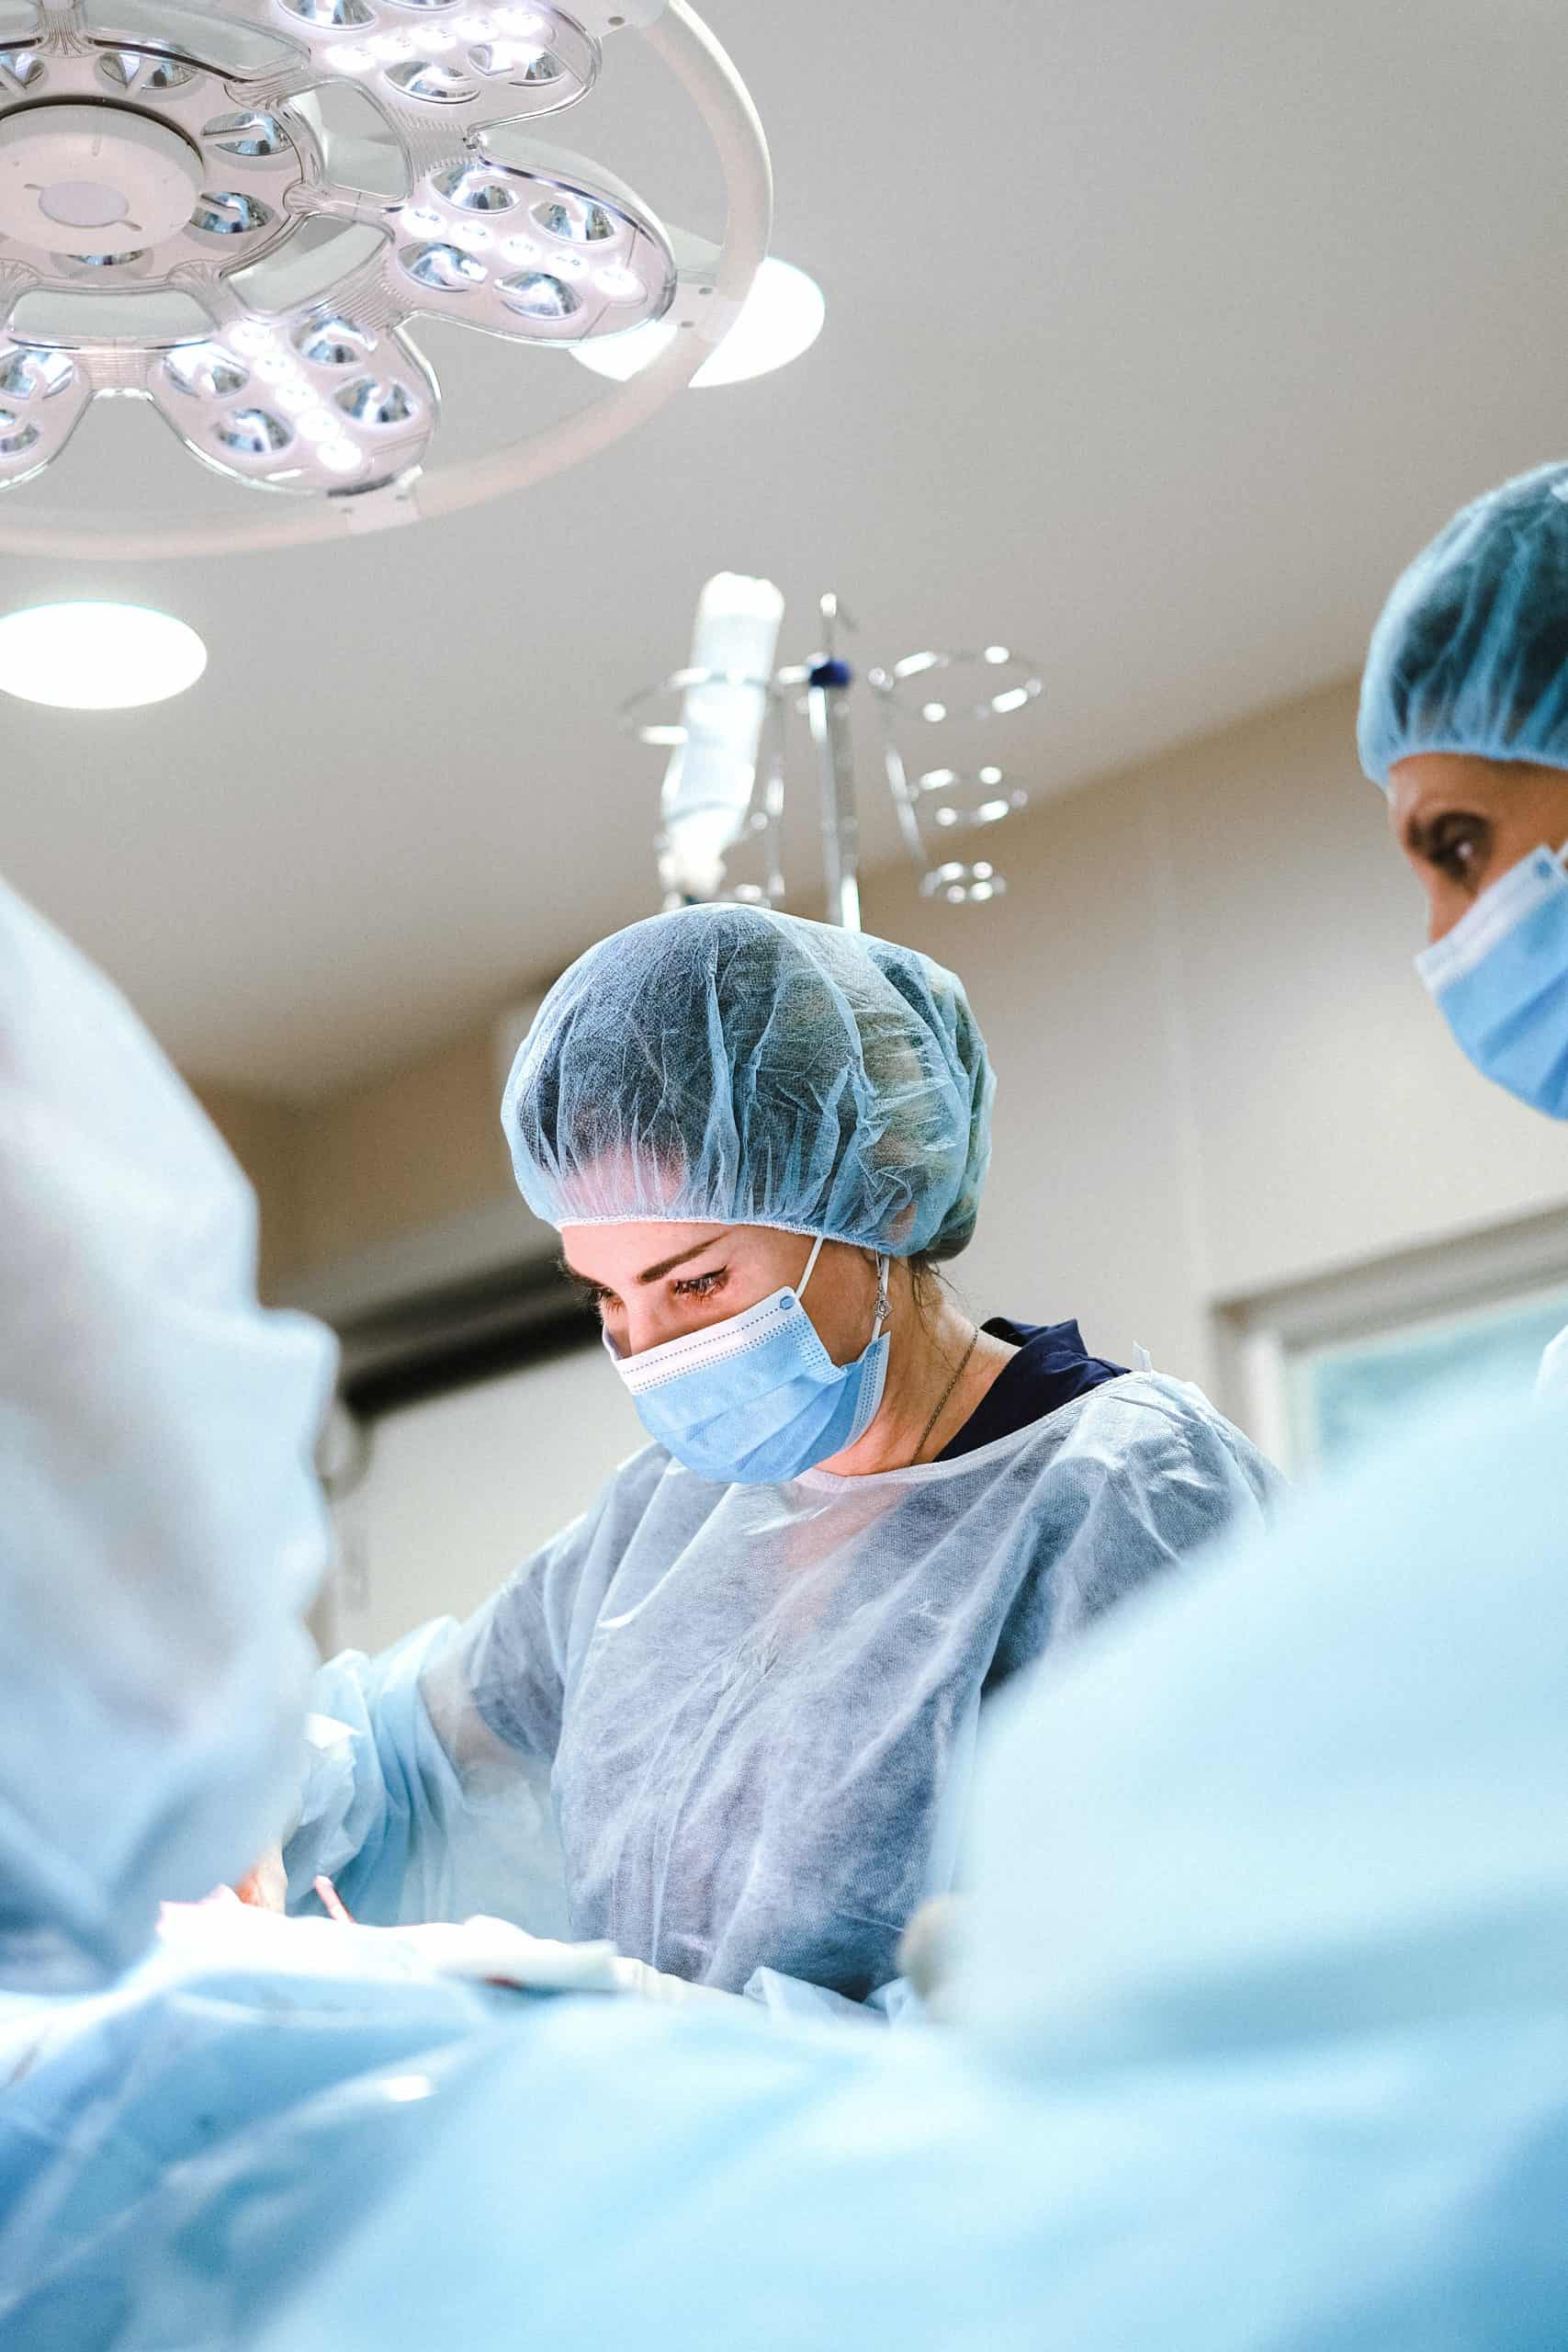 Tips for choosing the right plastic surgeon